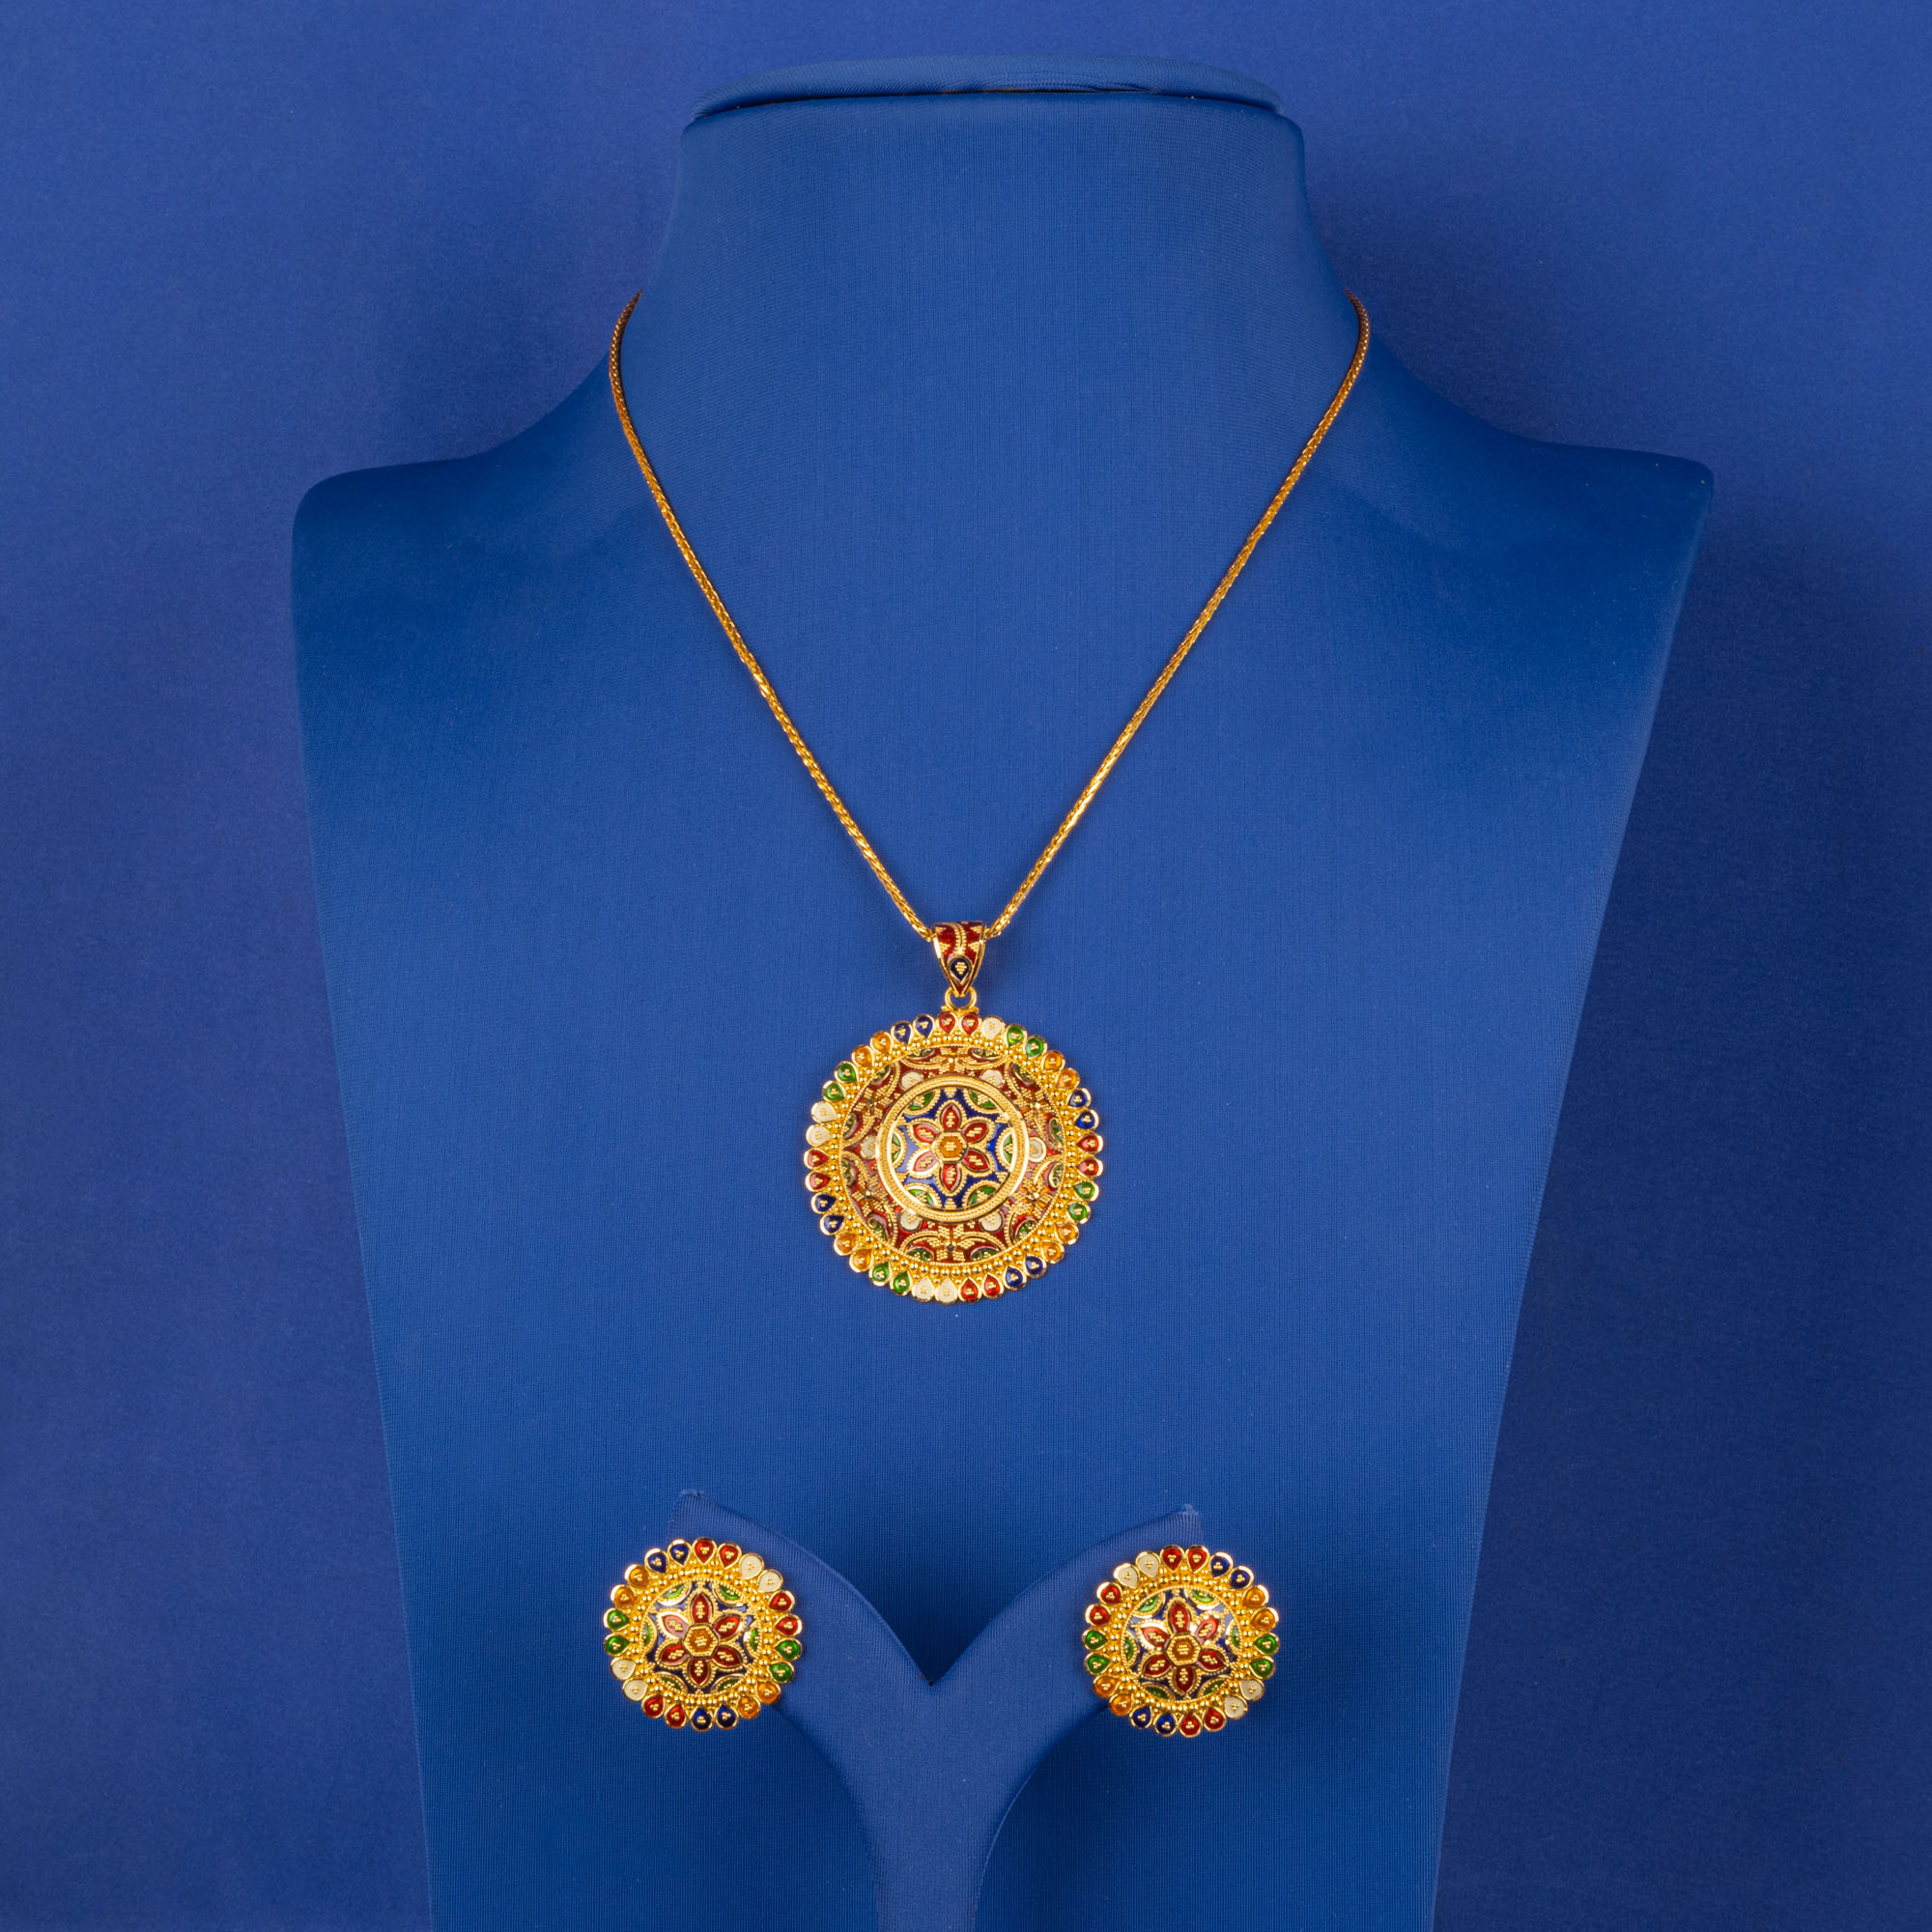 Ethereal Aura: Handmade 22K Gold Pendant and Earrings Set (chain not included)